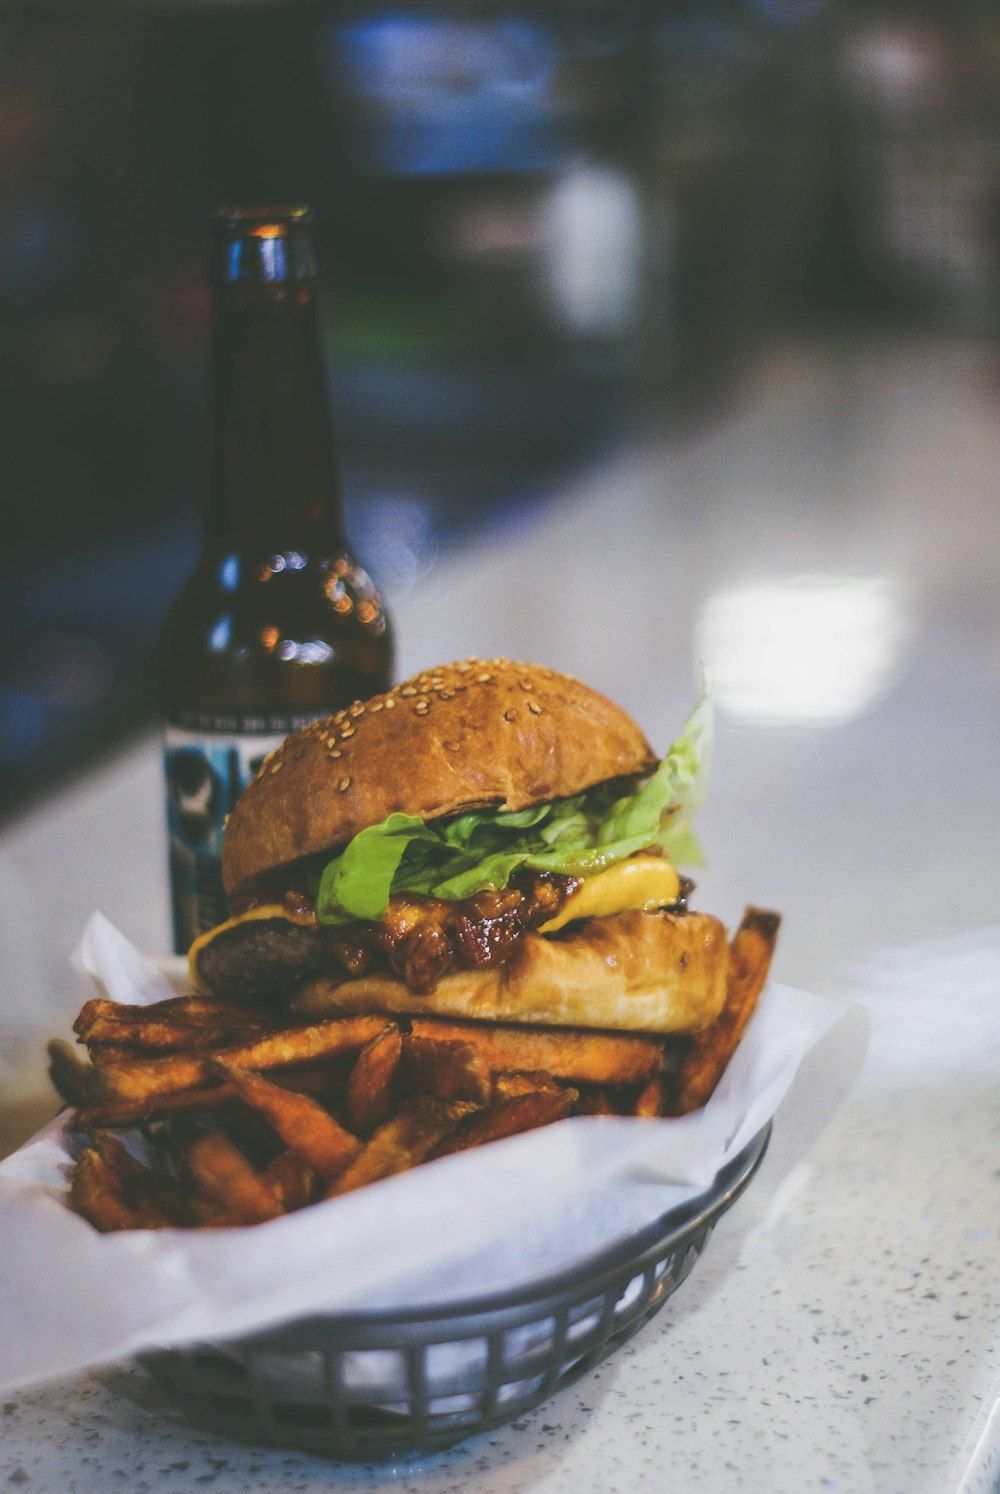 burger placed on grey bowl near beer bottle